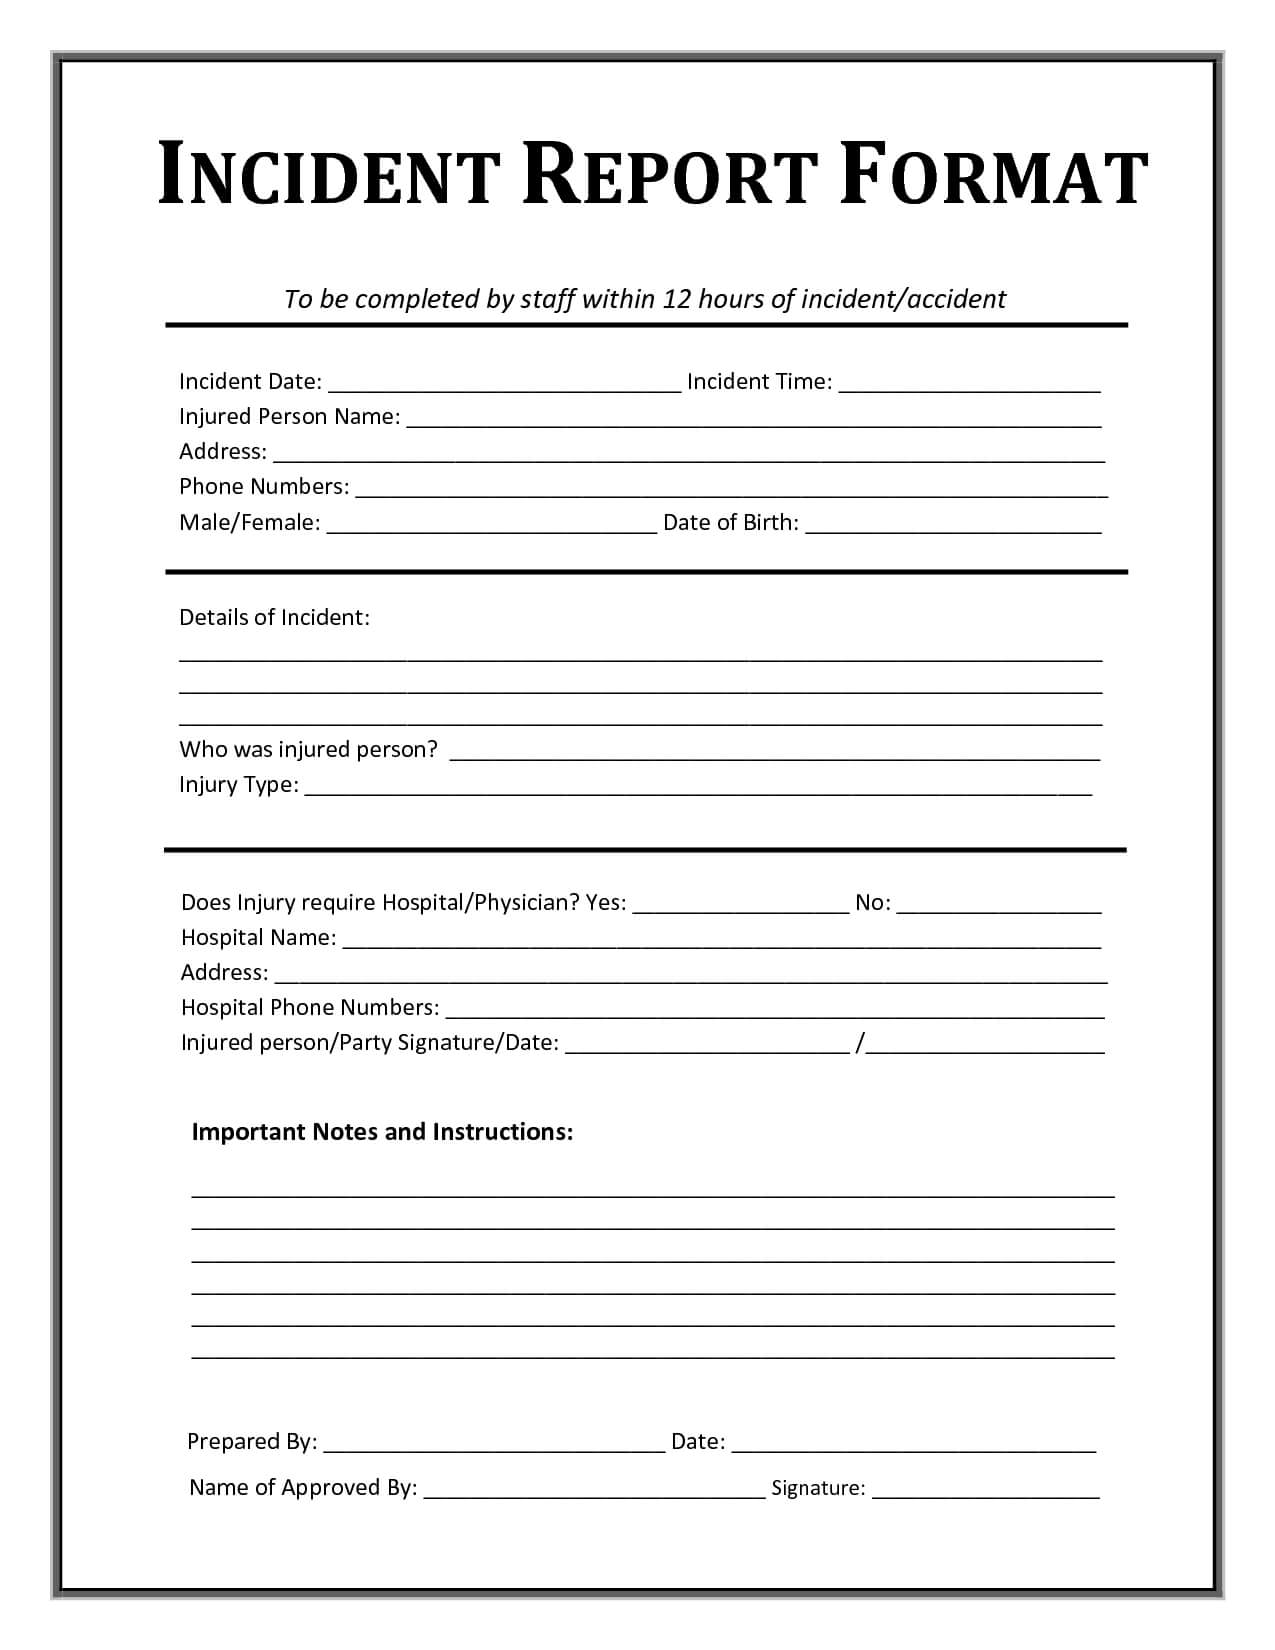 Incident Report Form Template Microsoft Excel | Report in Incident Report Template Microsoft